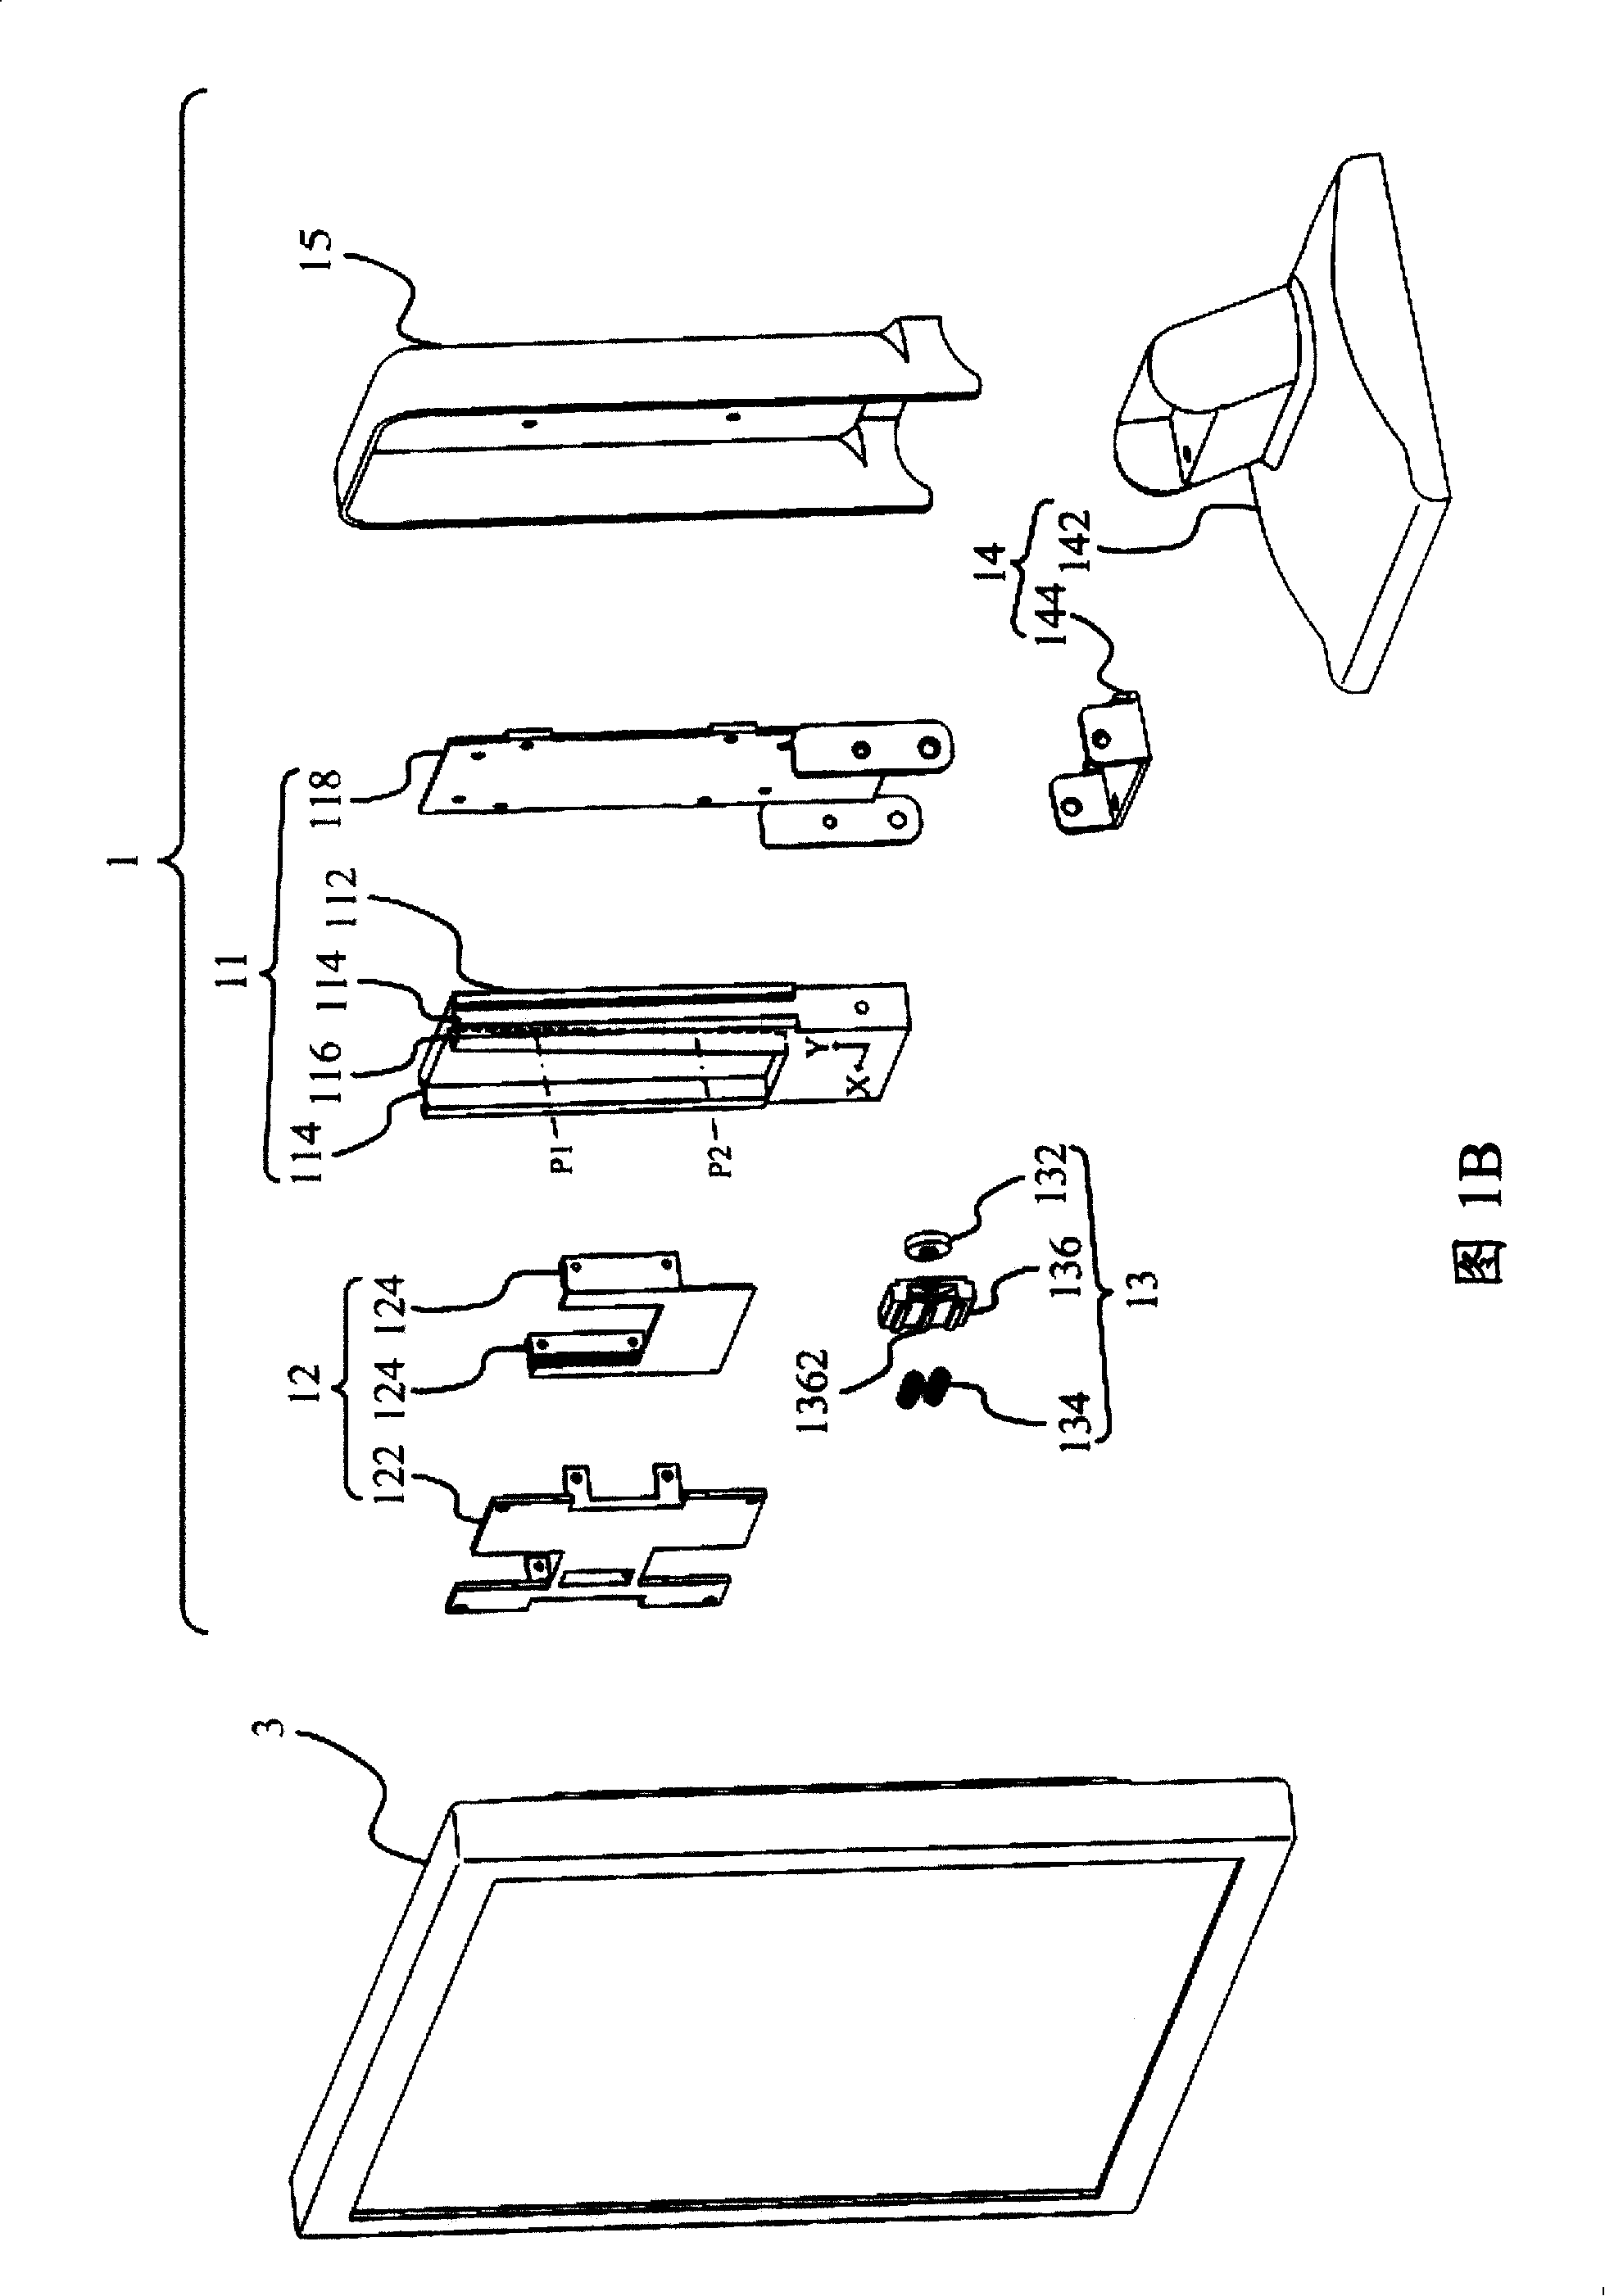 Supporting device with adjustable high